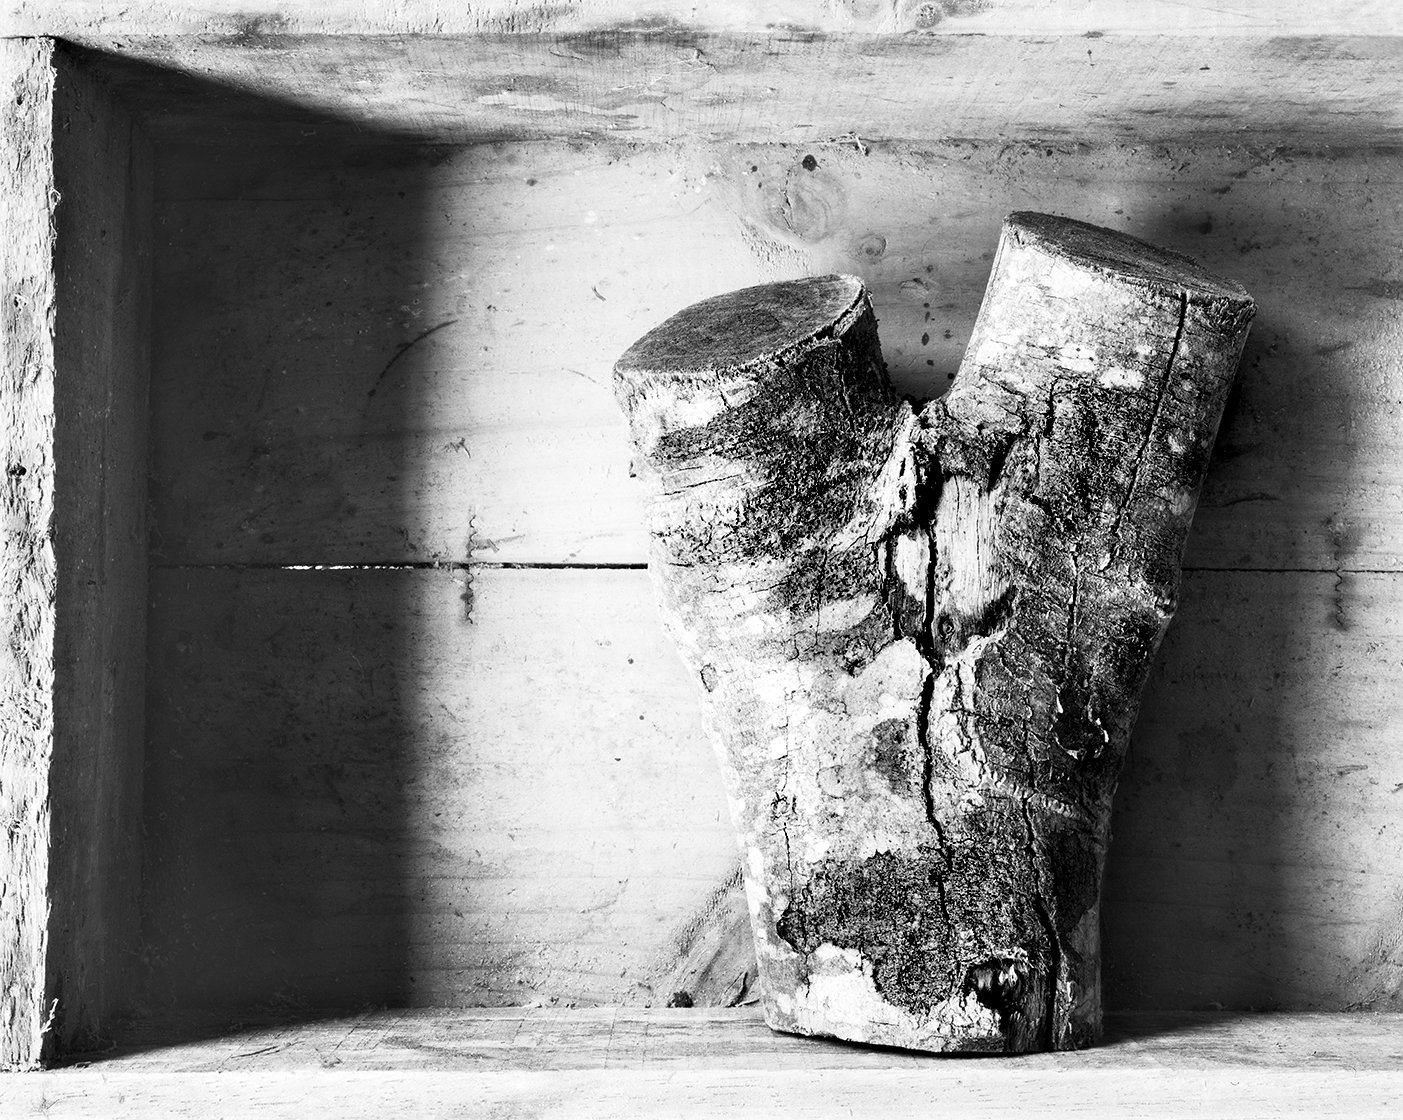    Wonders In The Woods     Log In A Box  2010 62cm x 77.5cm Archival pigment print  